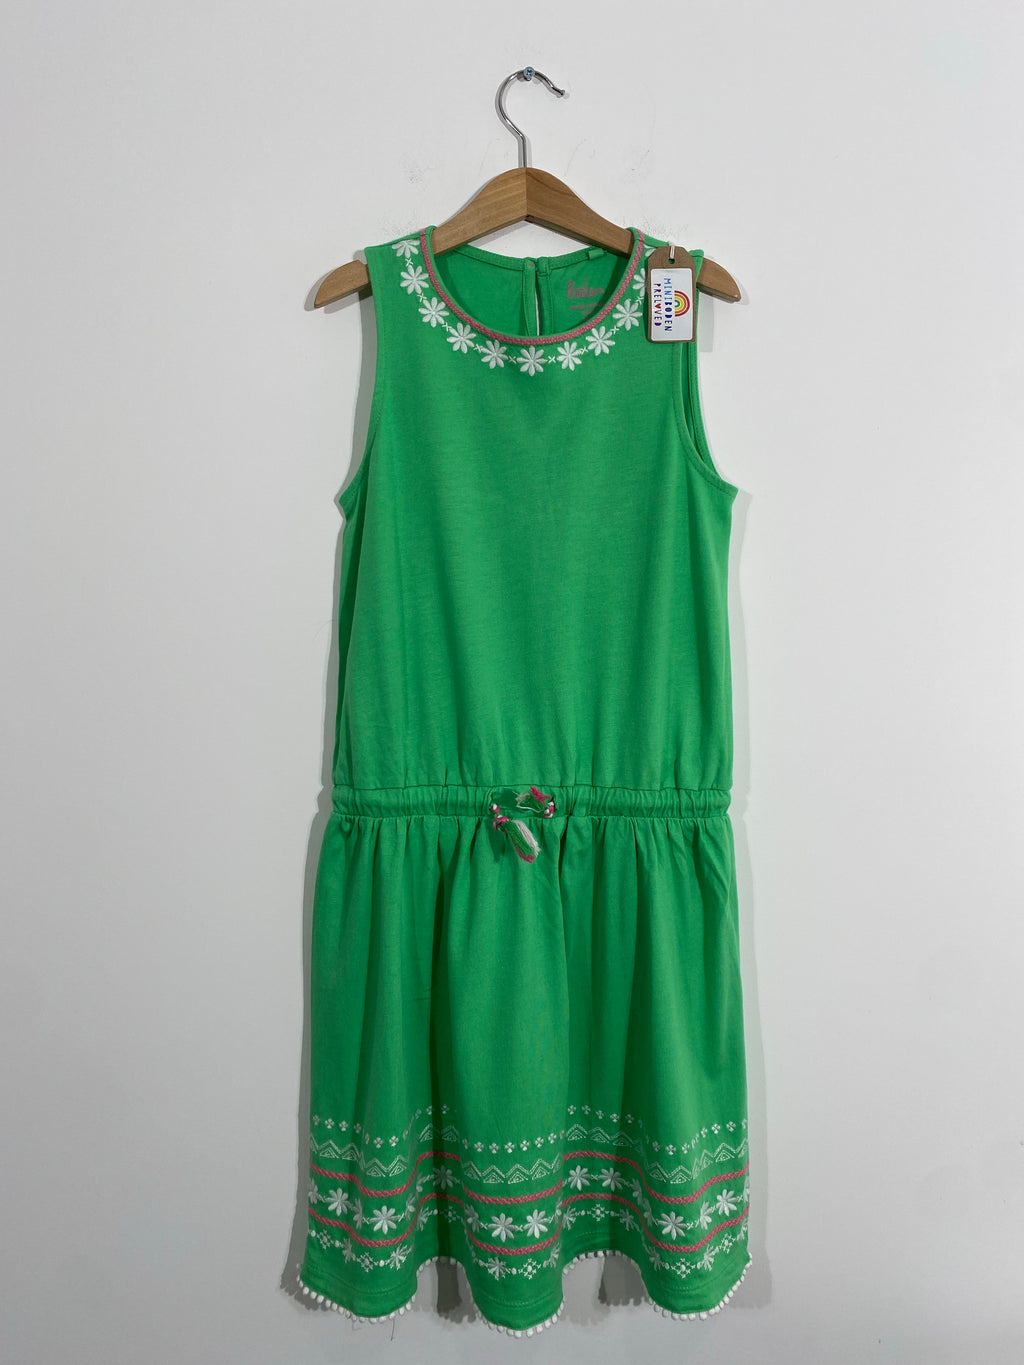 Lovely Green Embroidered Jersey Sun Dress (9-10 Years)